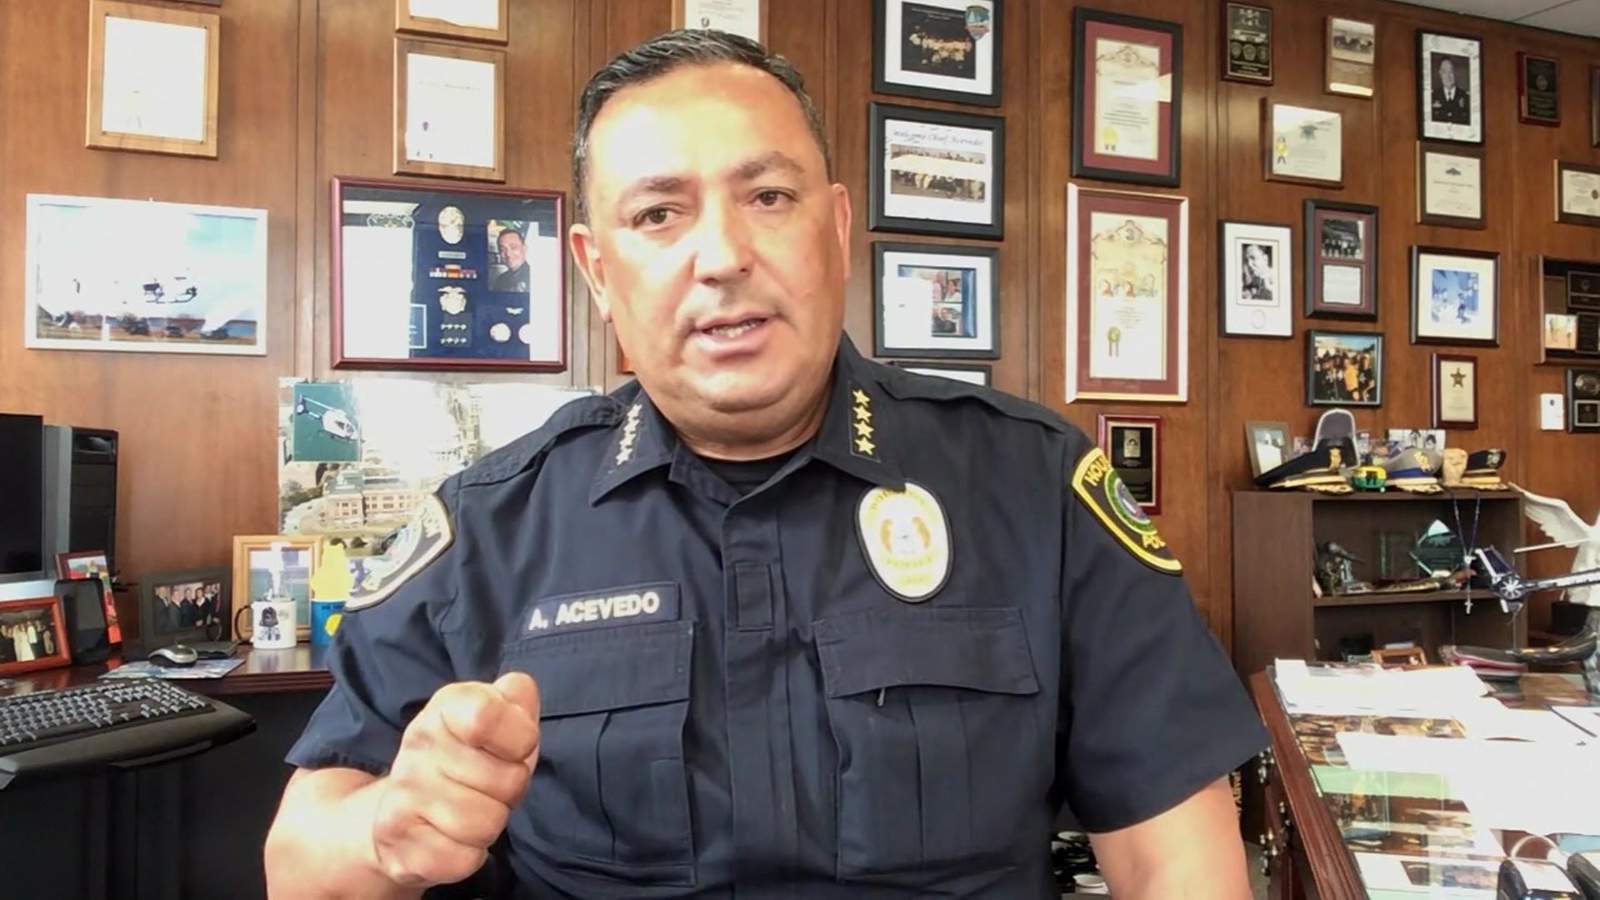 ‘This is not Hollywood’: Acevedo tells Trump ‘it’s time to be presidential’